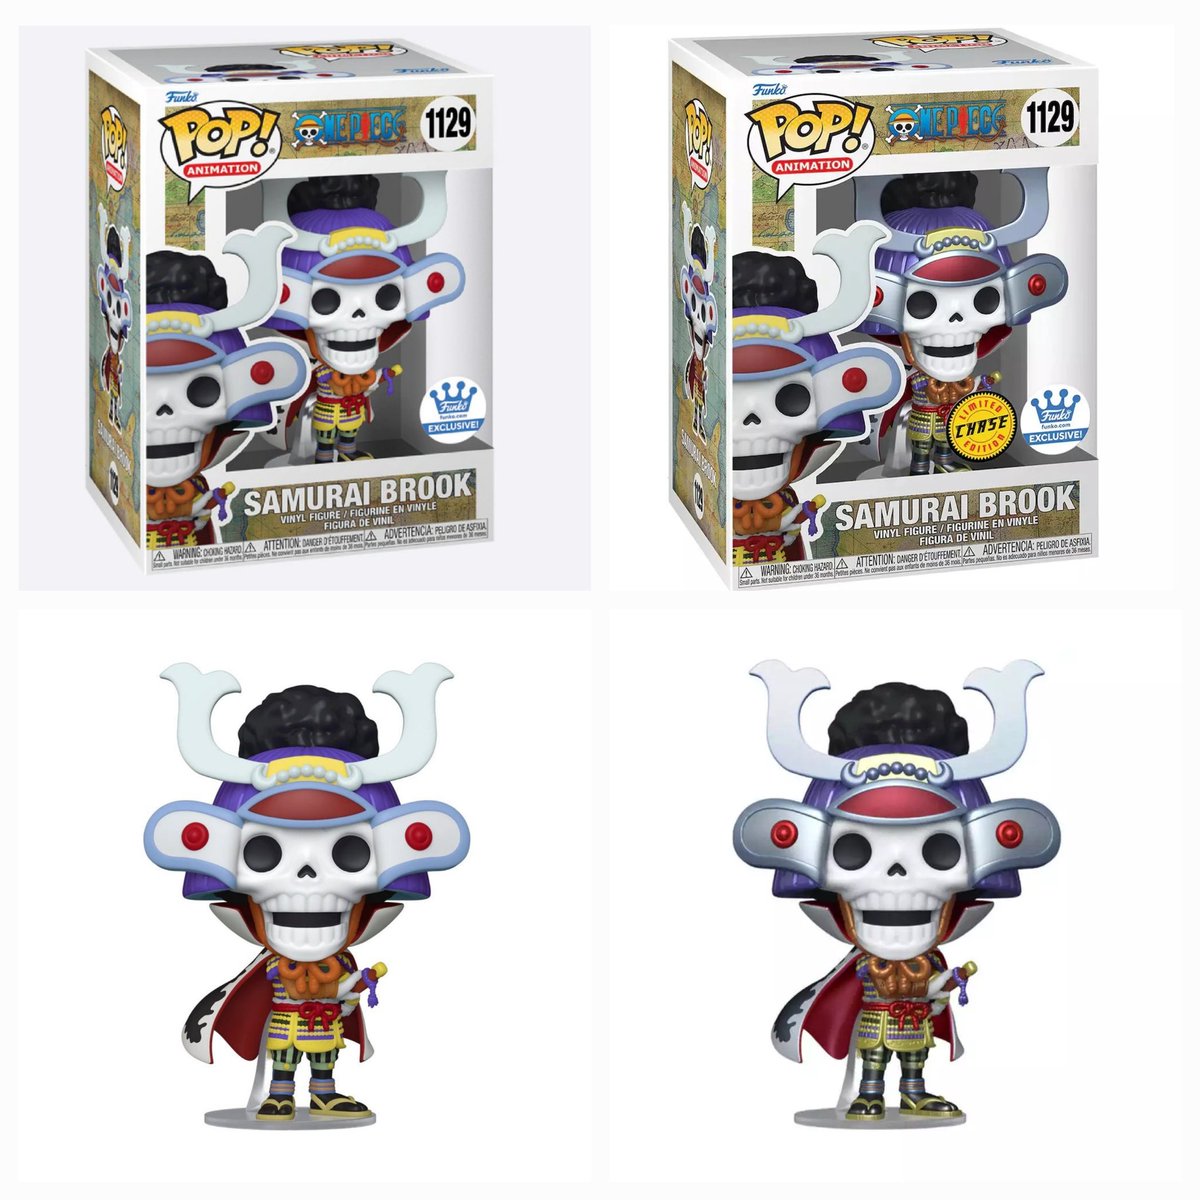 FYI 

A Samurai Brook restock is coming to the Funko shop with about 6k Stock! Could be an early morning restock drop this week!

Thanks @Soup Discord 
-
#funko #funkopop #funkopops #anime #manga #skittlerampage #onepiece #Brook #monkeydluffy #strawhatpirates #luffy